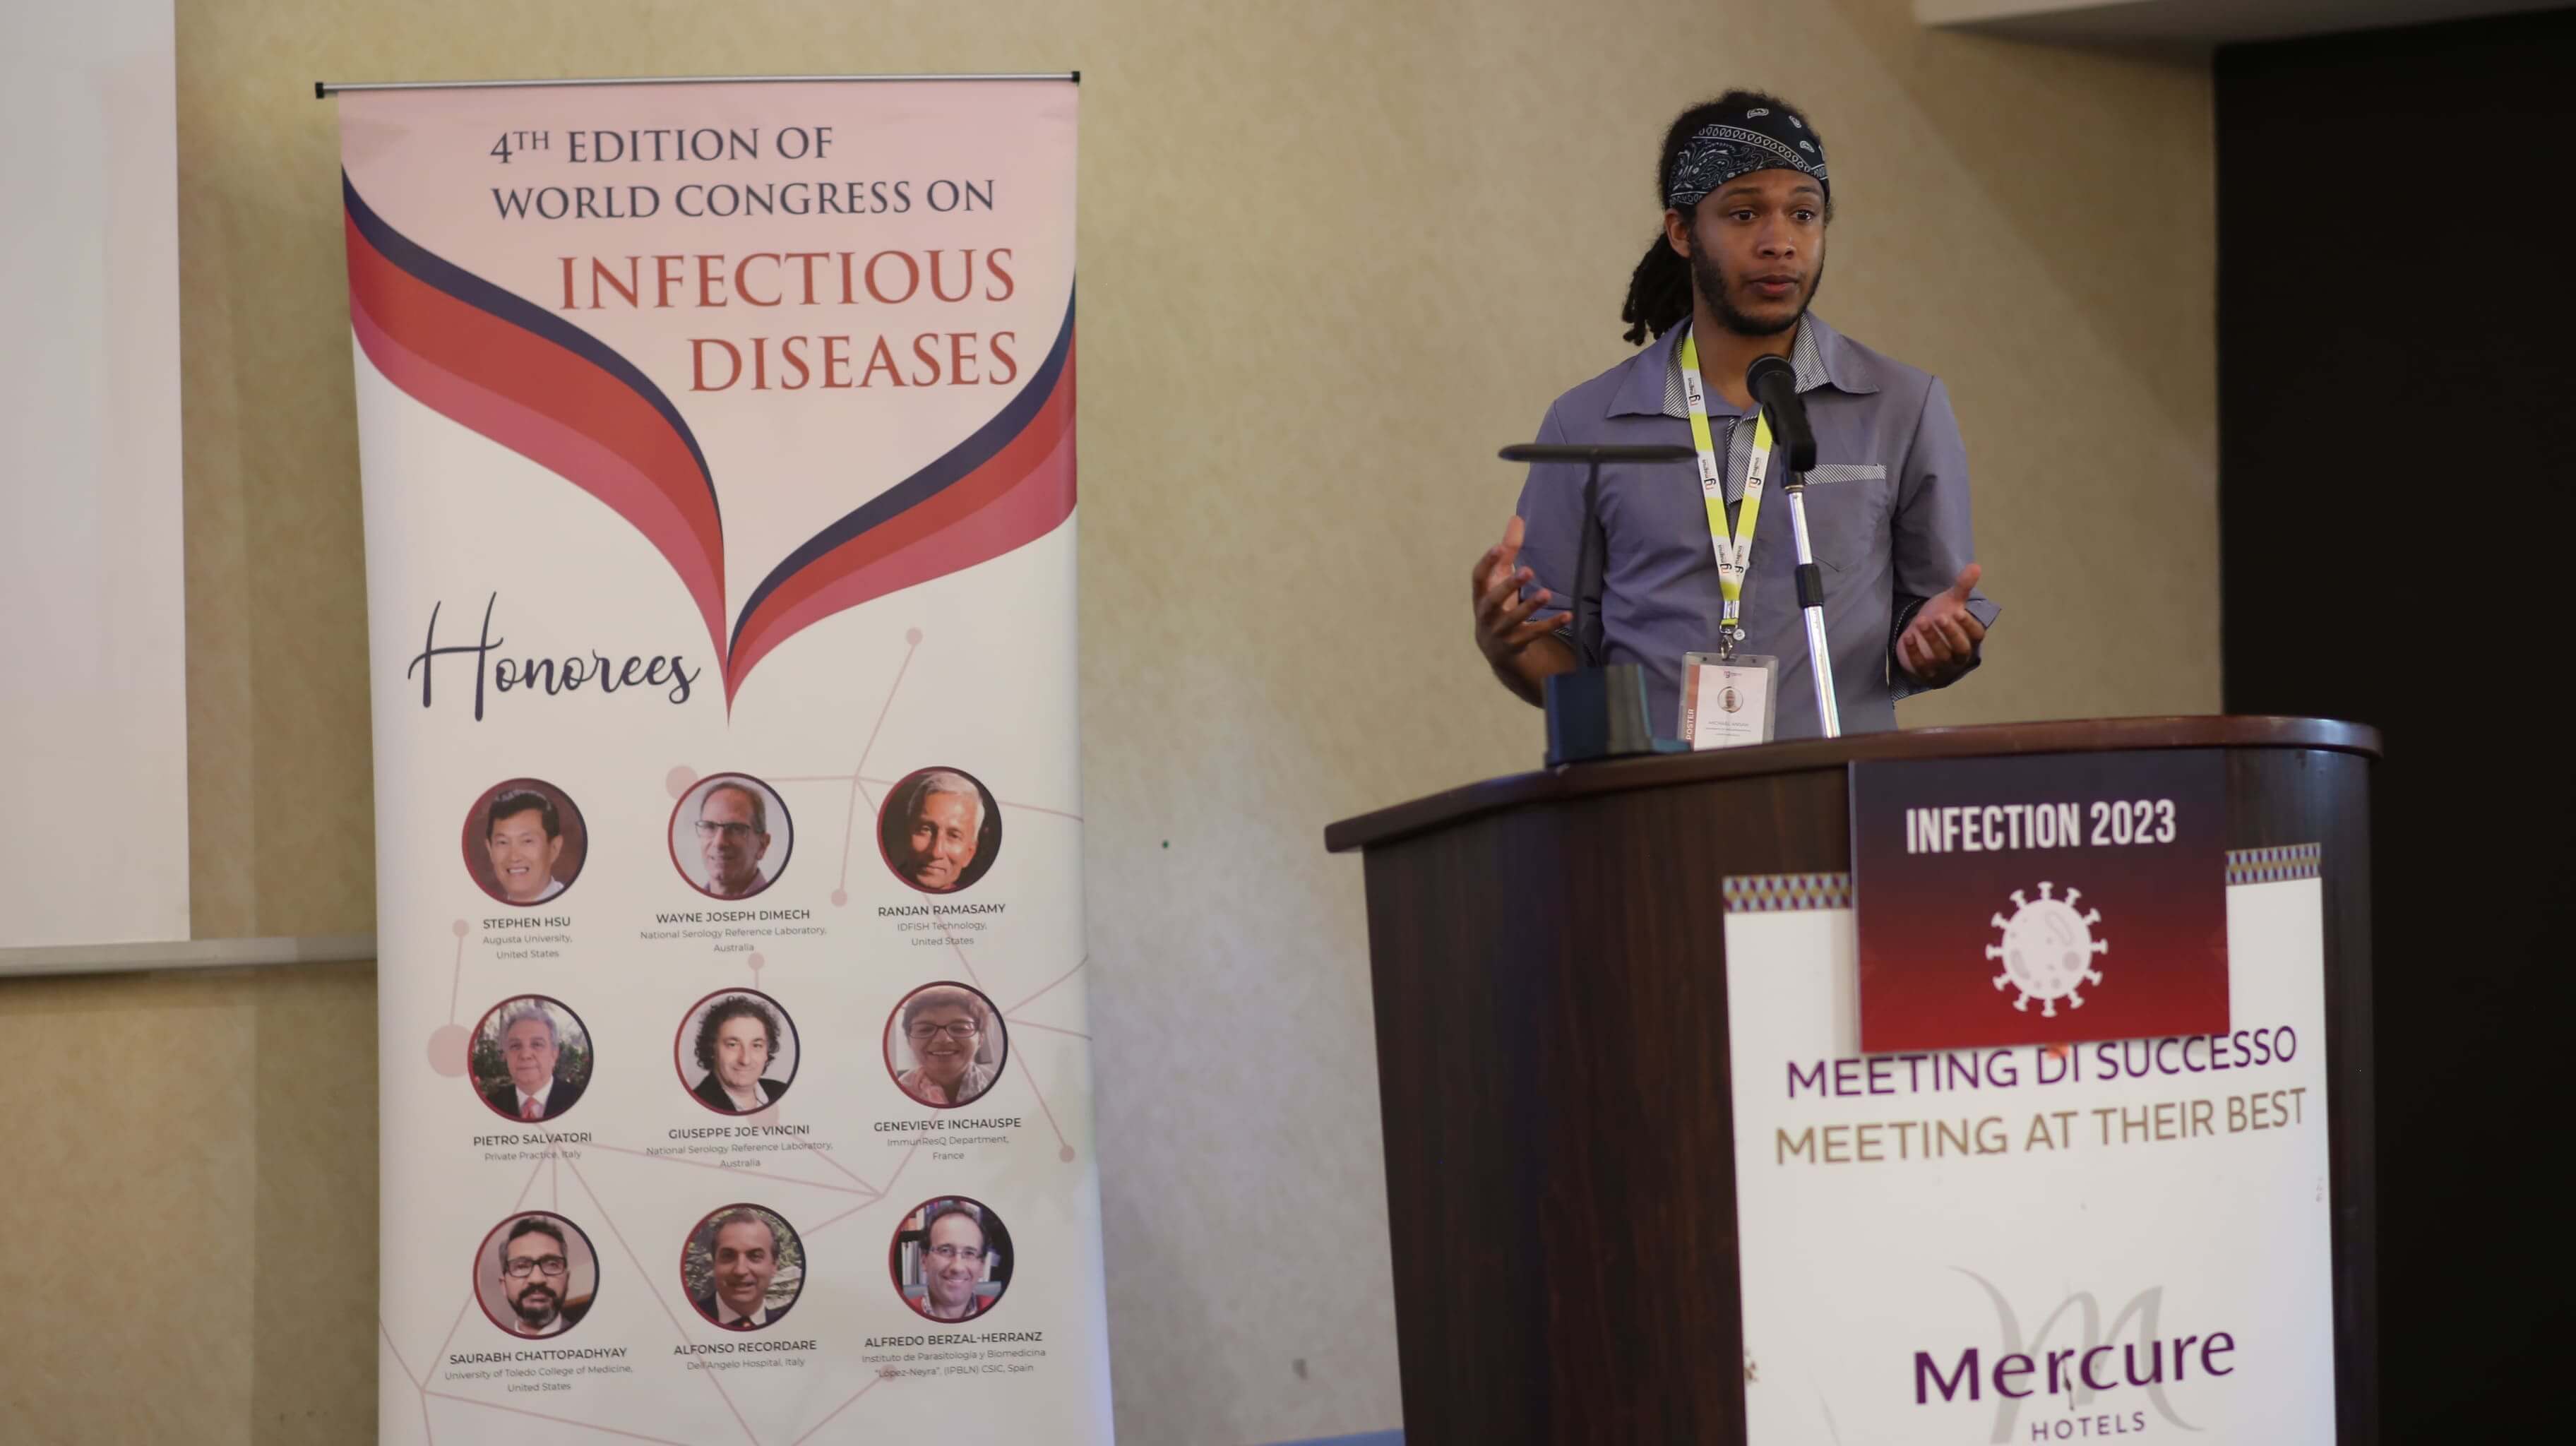 Infection Conferences